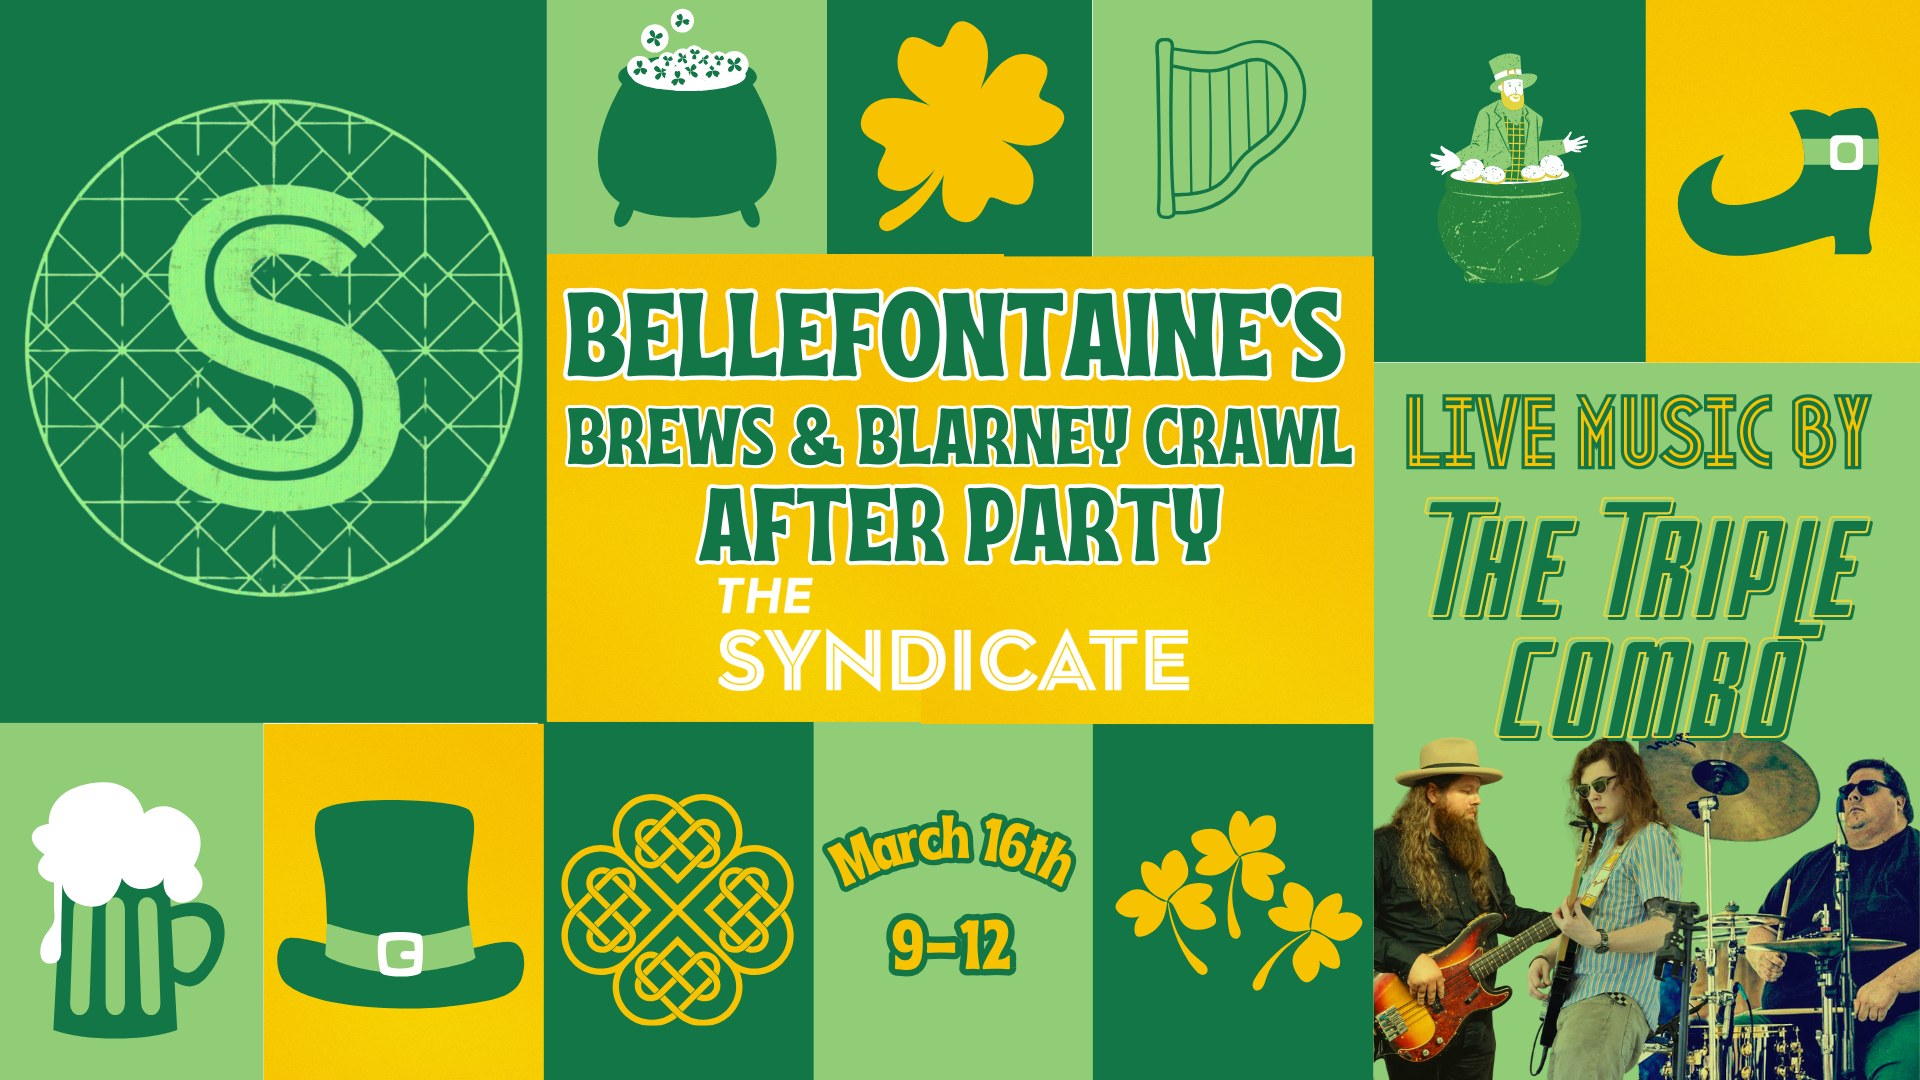 Bellefontaine Brews & Blarney Crawl After Party